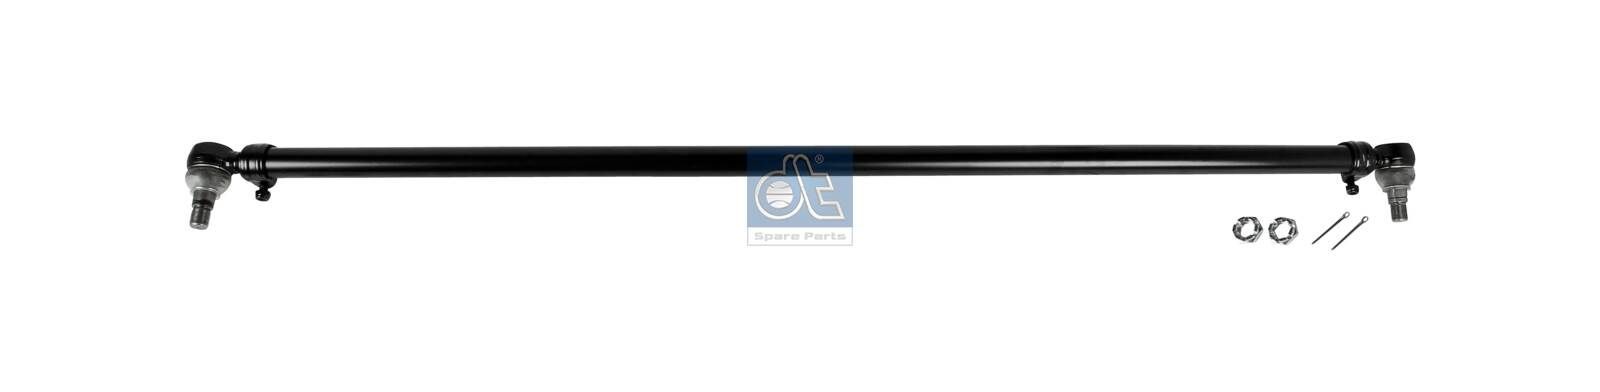 DT Spare Parts 3.63031 Rod Assembly 81467116934